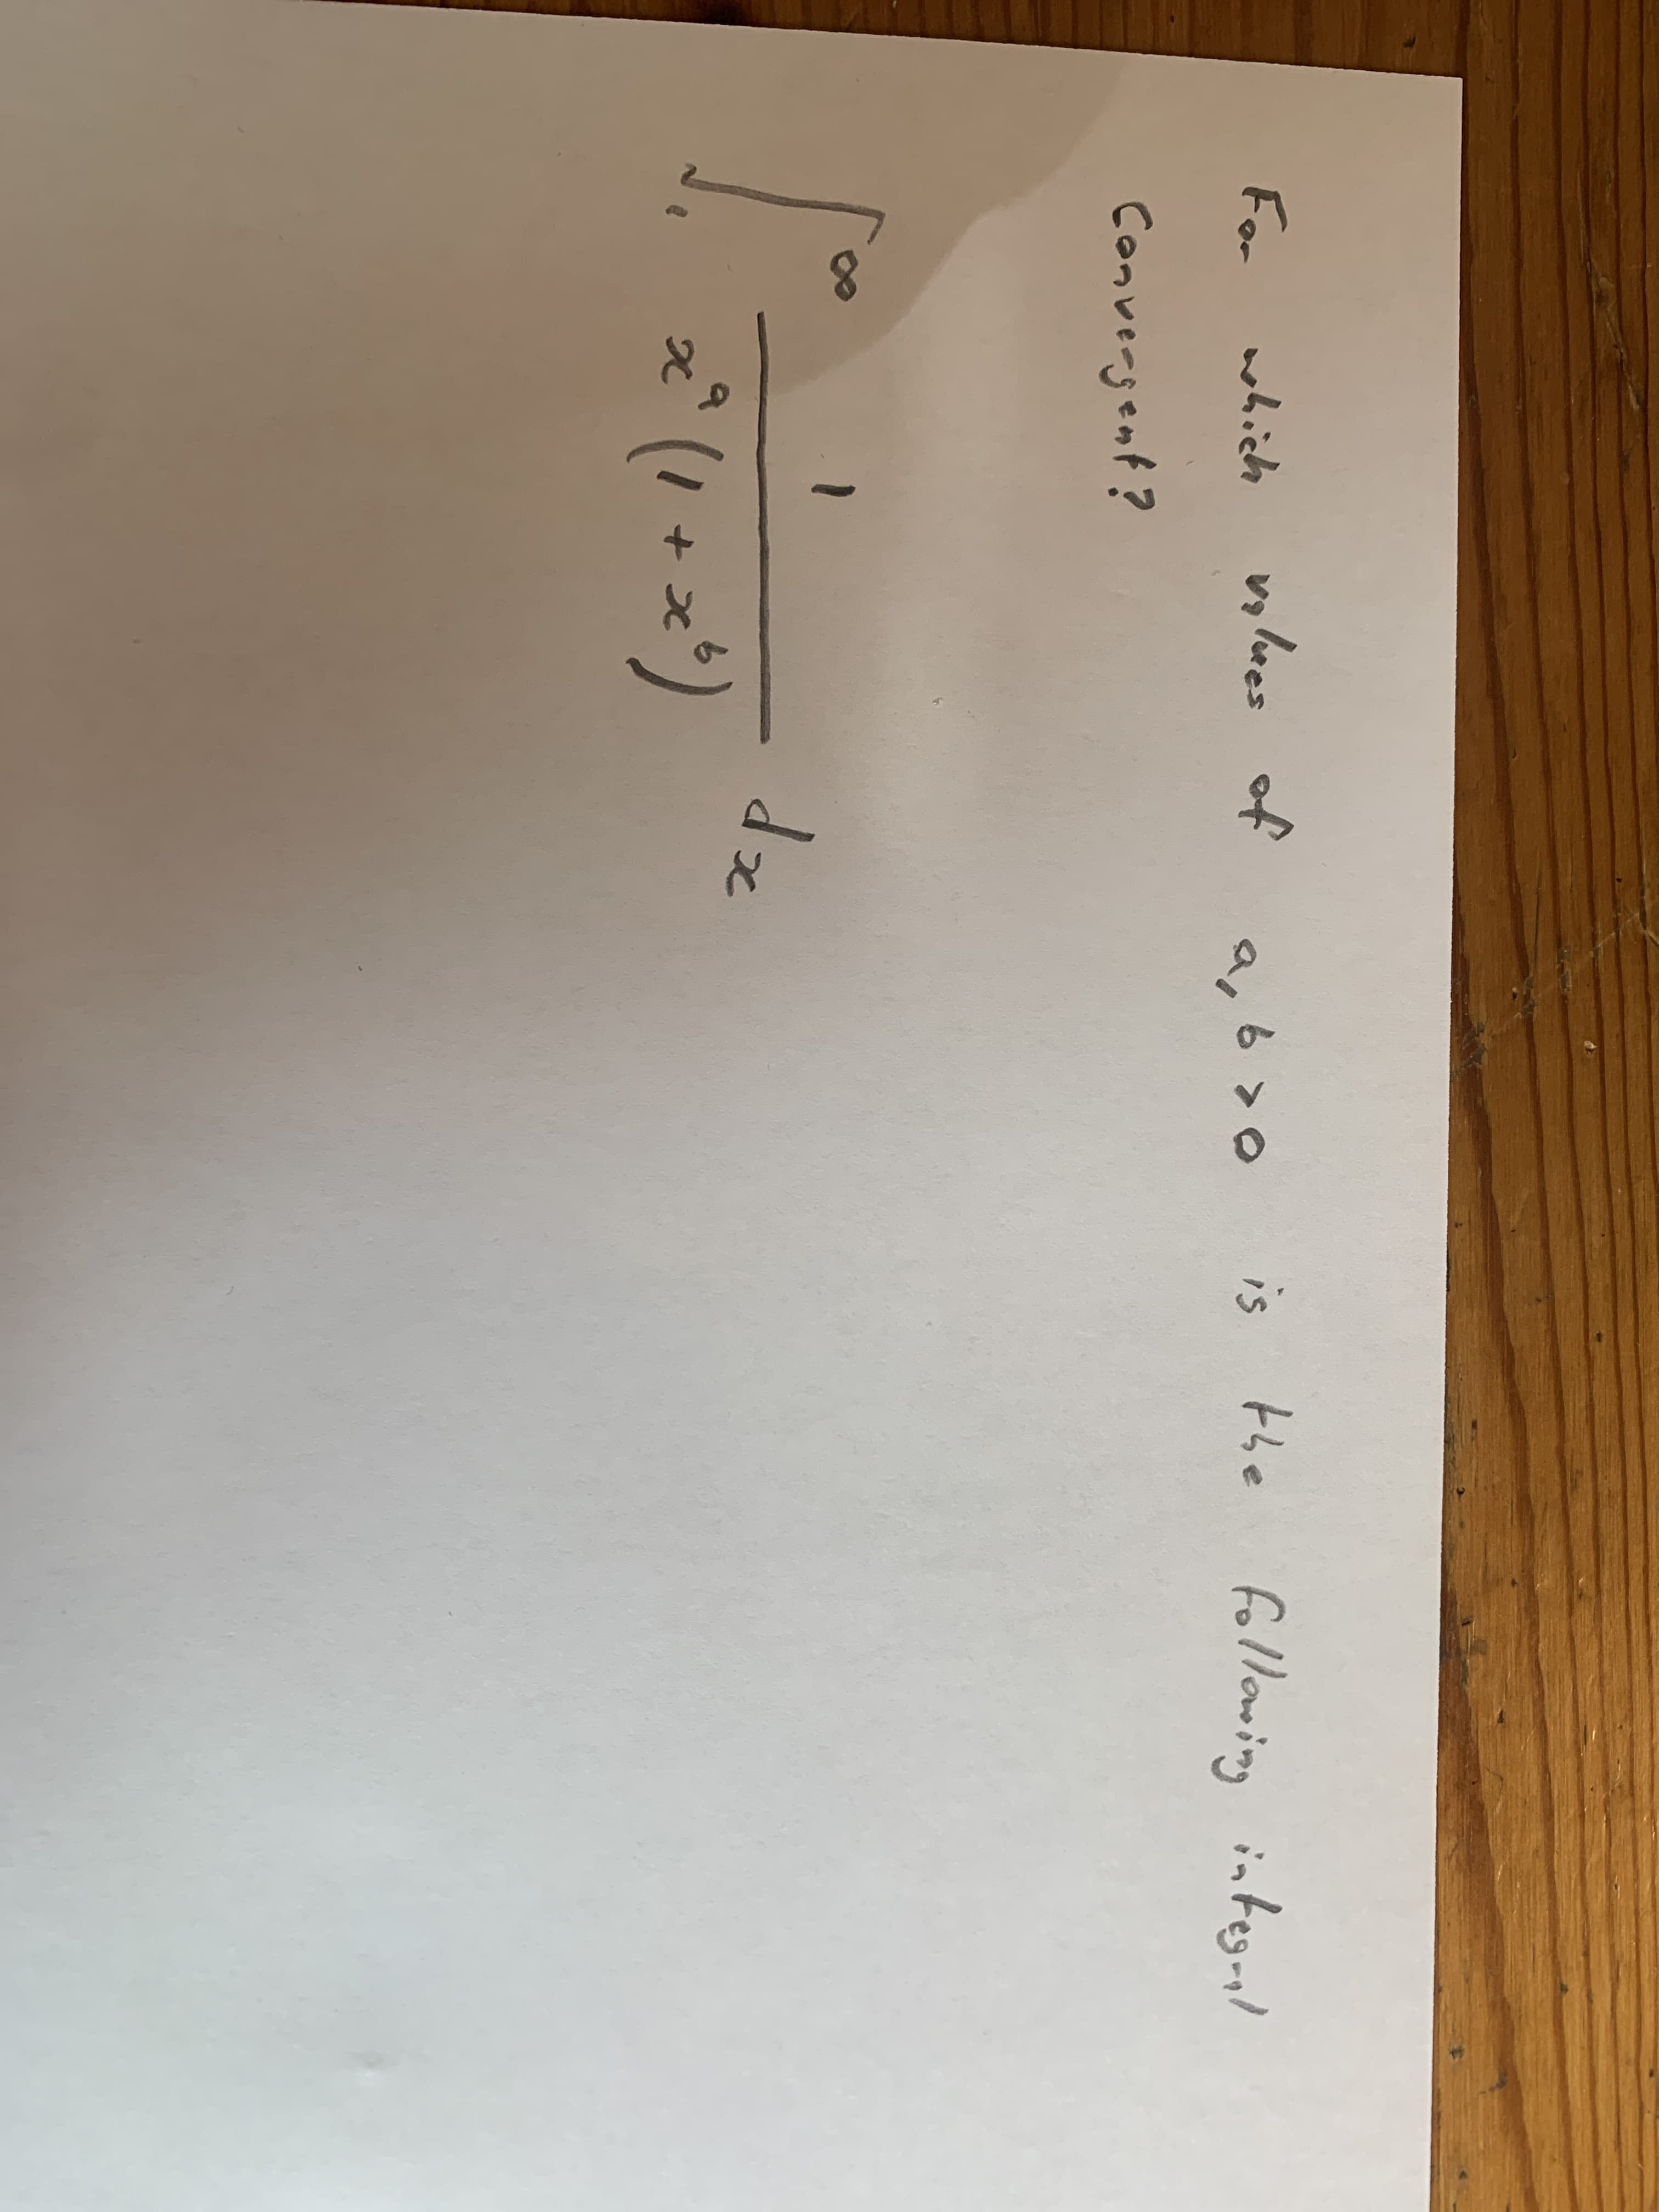 ohoes of
a, 6 >0
is
the
following
integral
For
which
Convergent?
dz
+.
